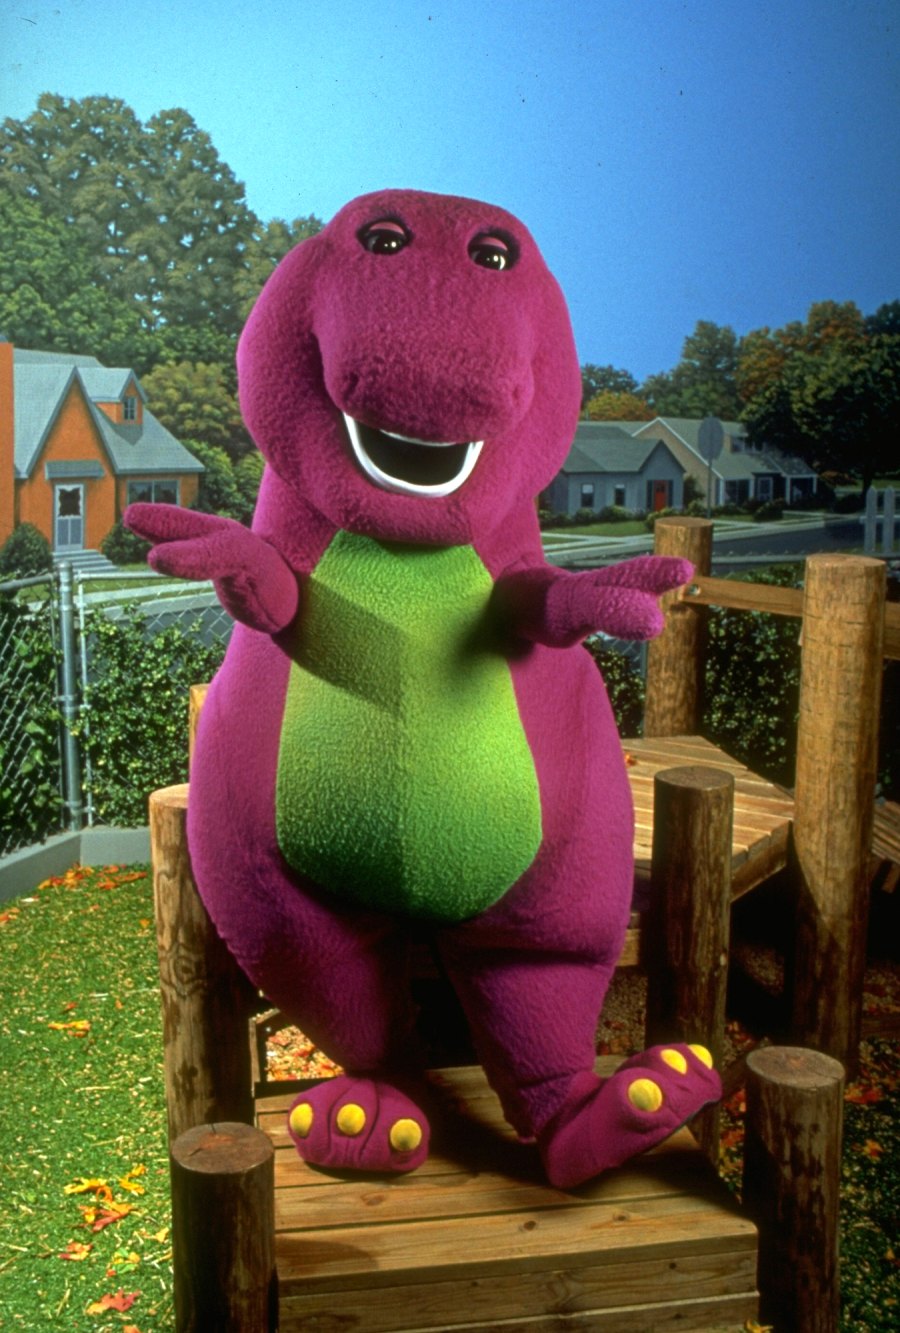 Barney Every Upcoming Movie Based on Mattel Toys Following Barbie’s Success